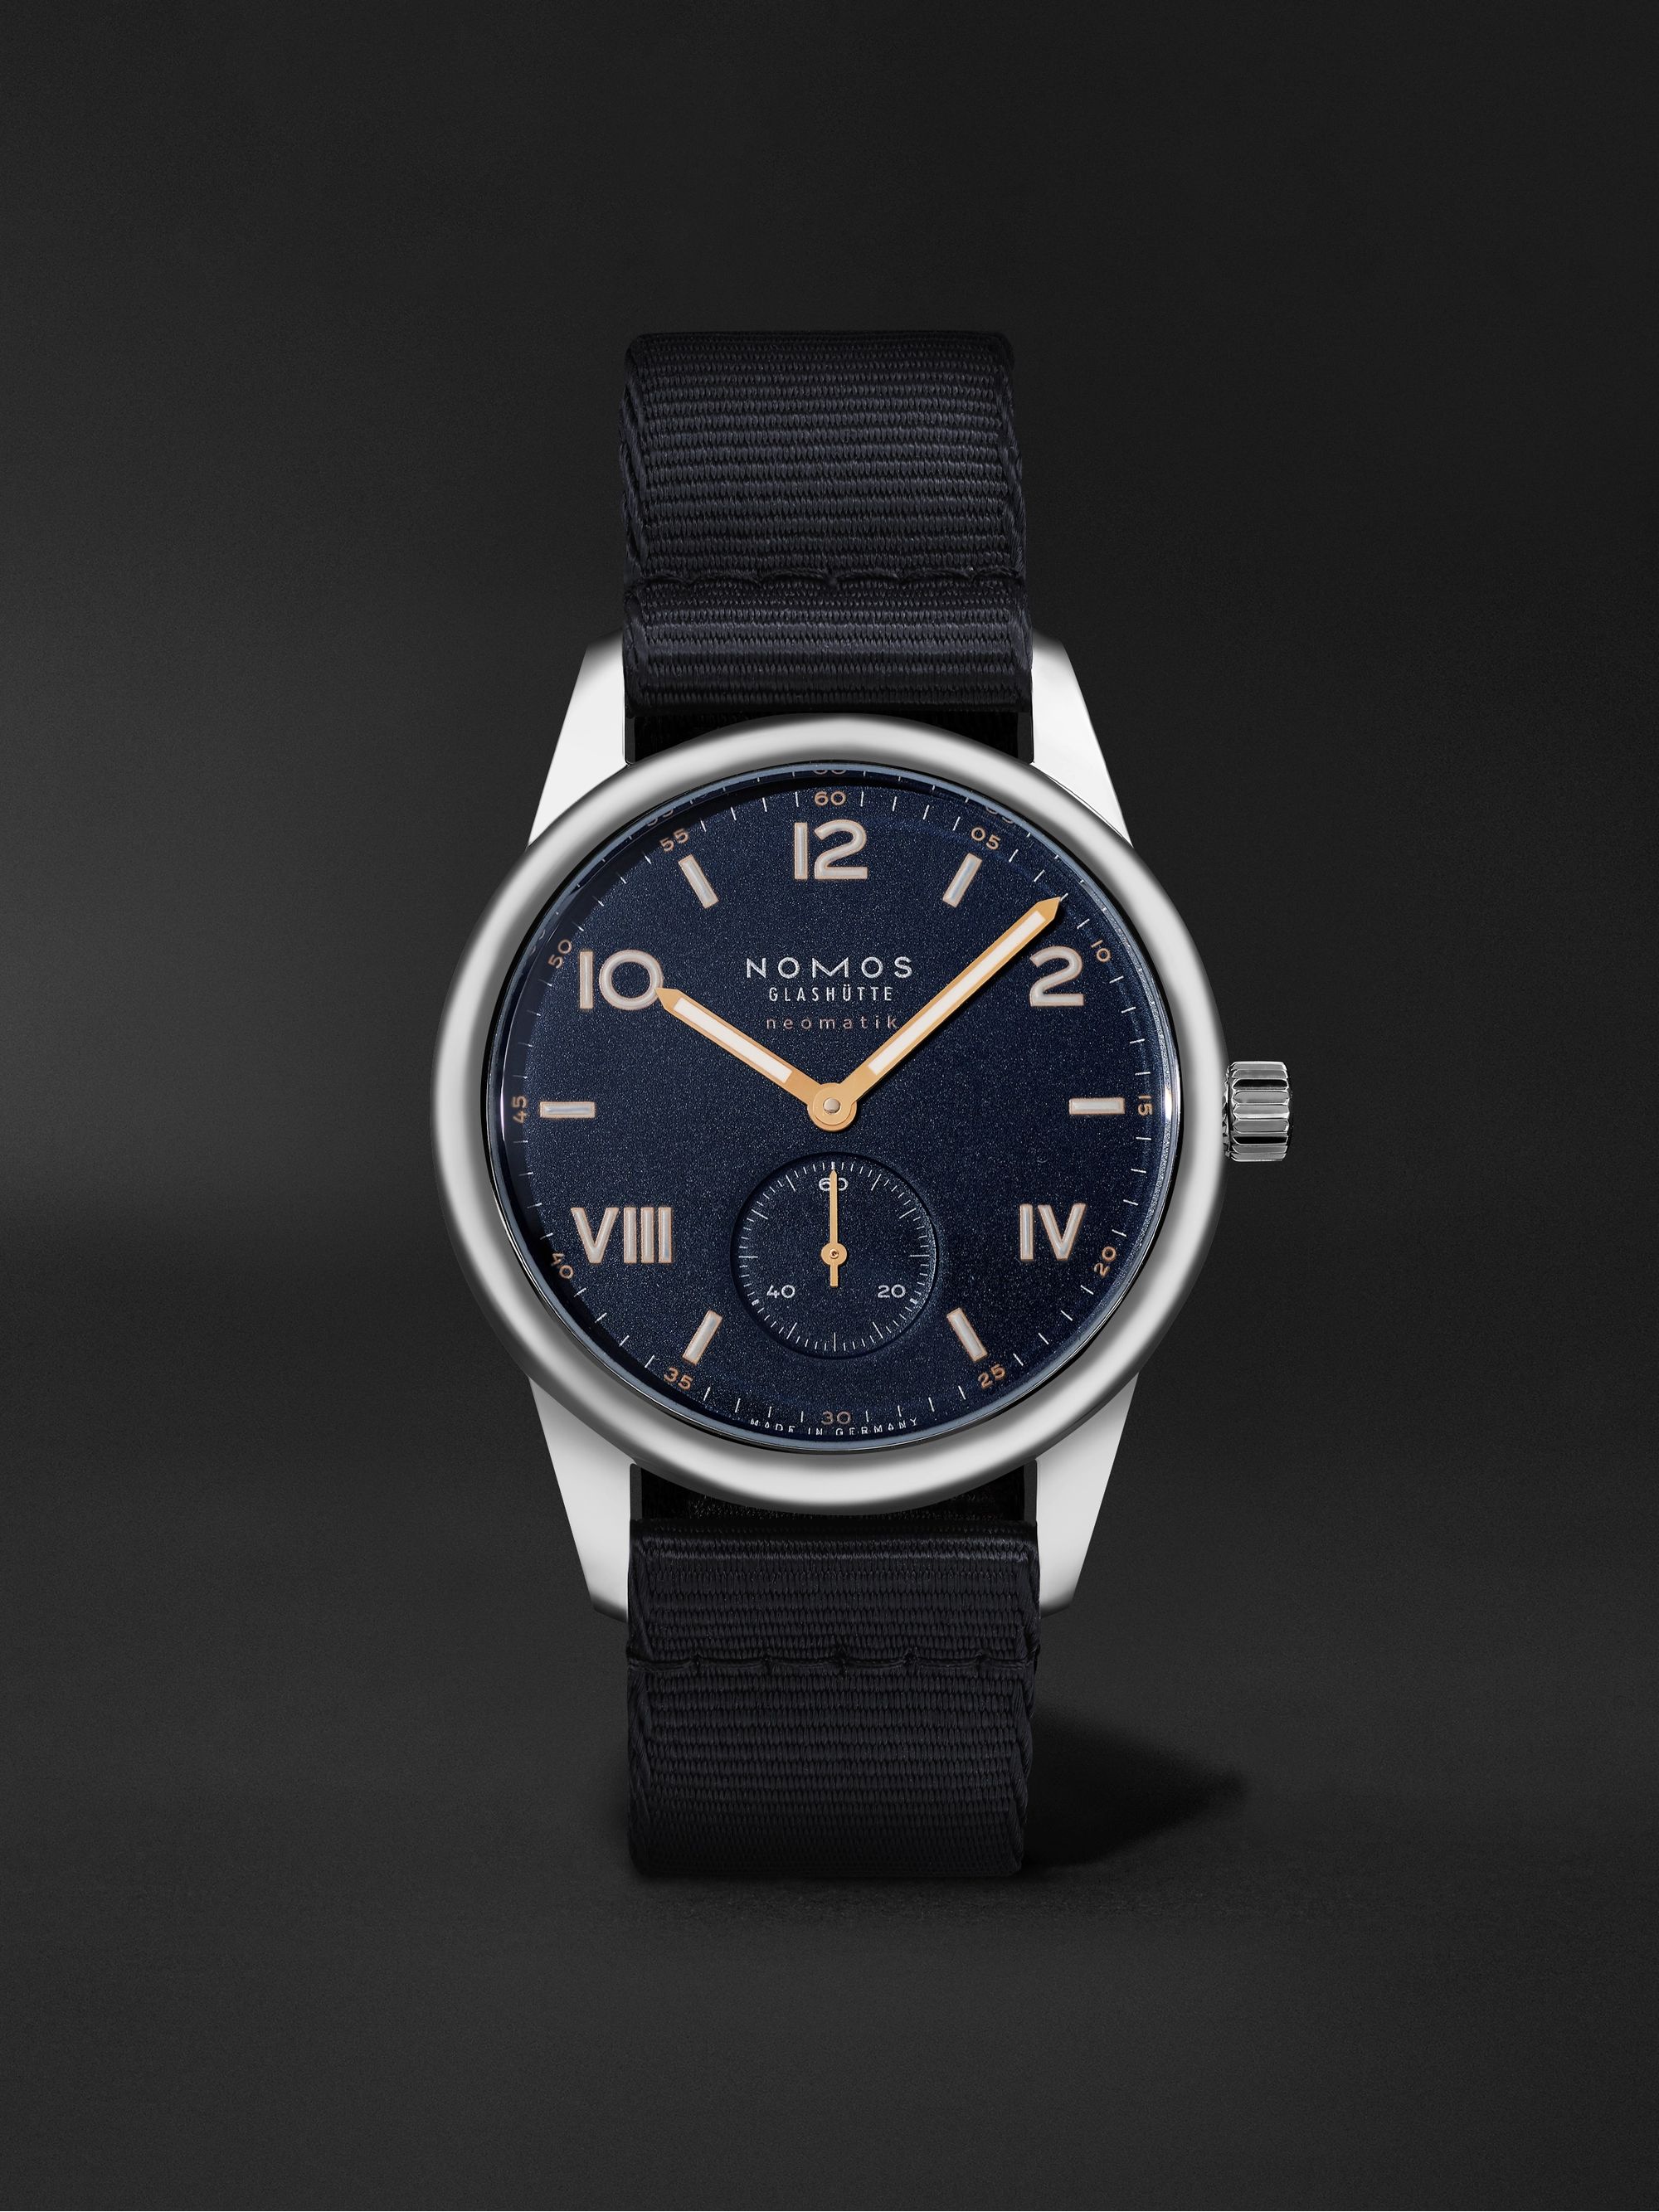 NOMOS GLASHÜTTE Club Campus Neomatik Automatic 39.5mm Stainless Steel and Canvas Watch, Ref. No. 767